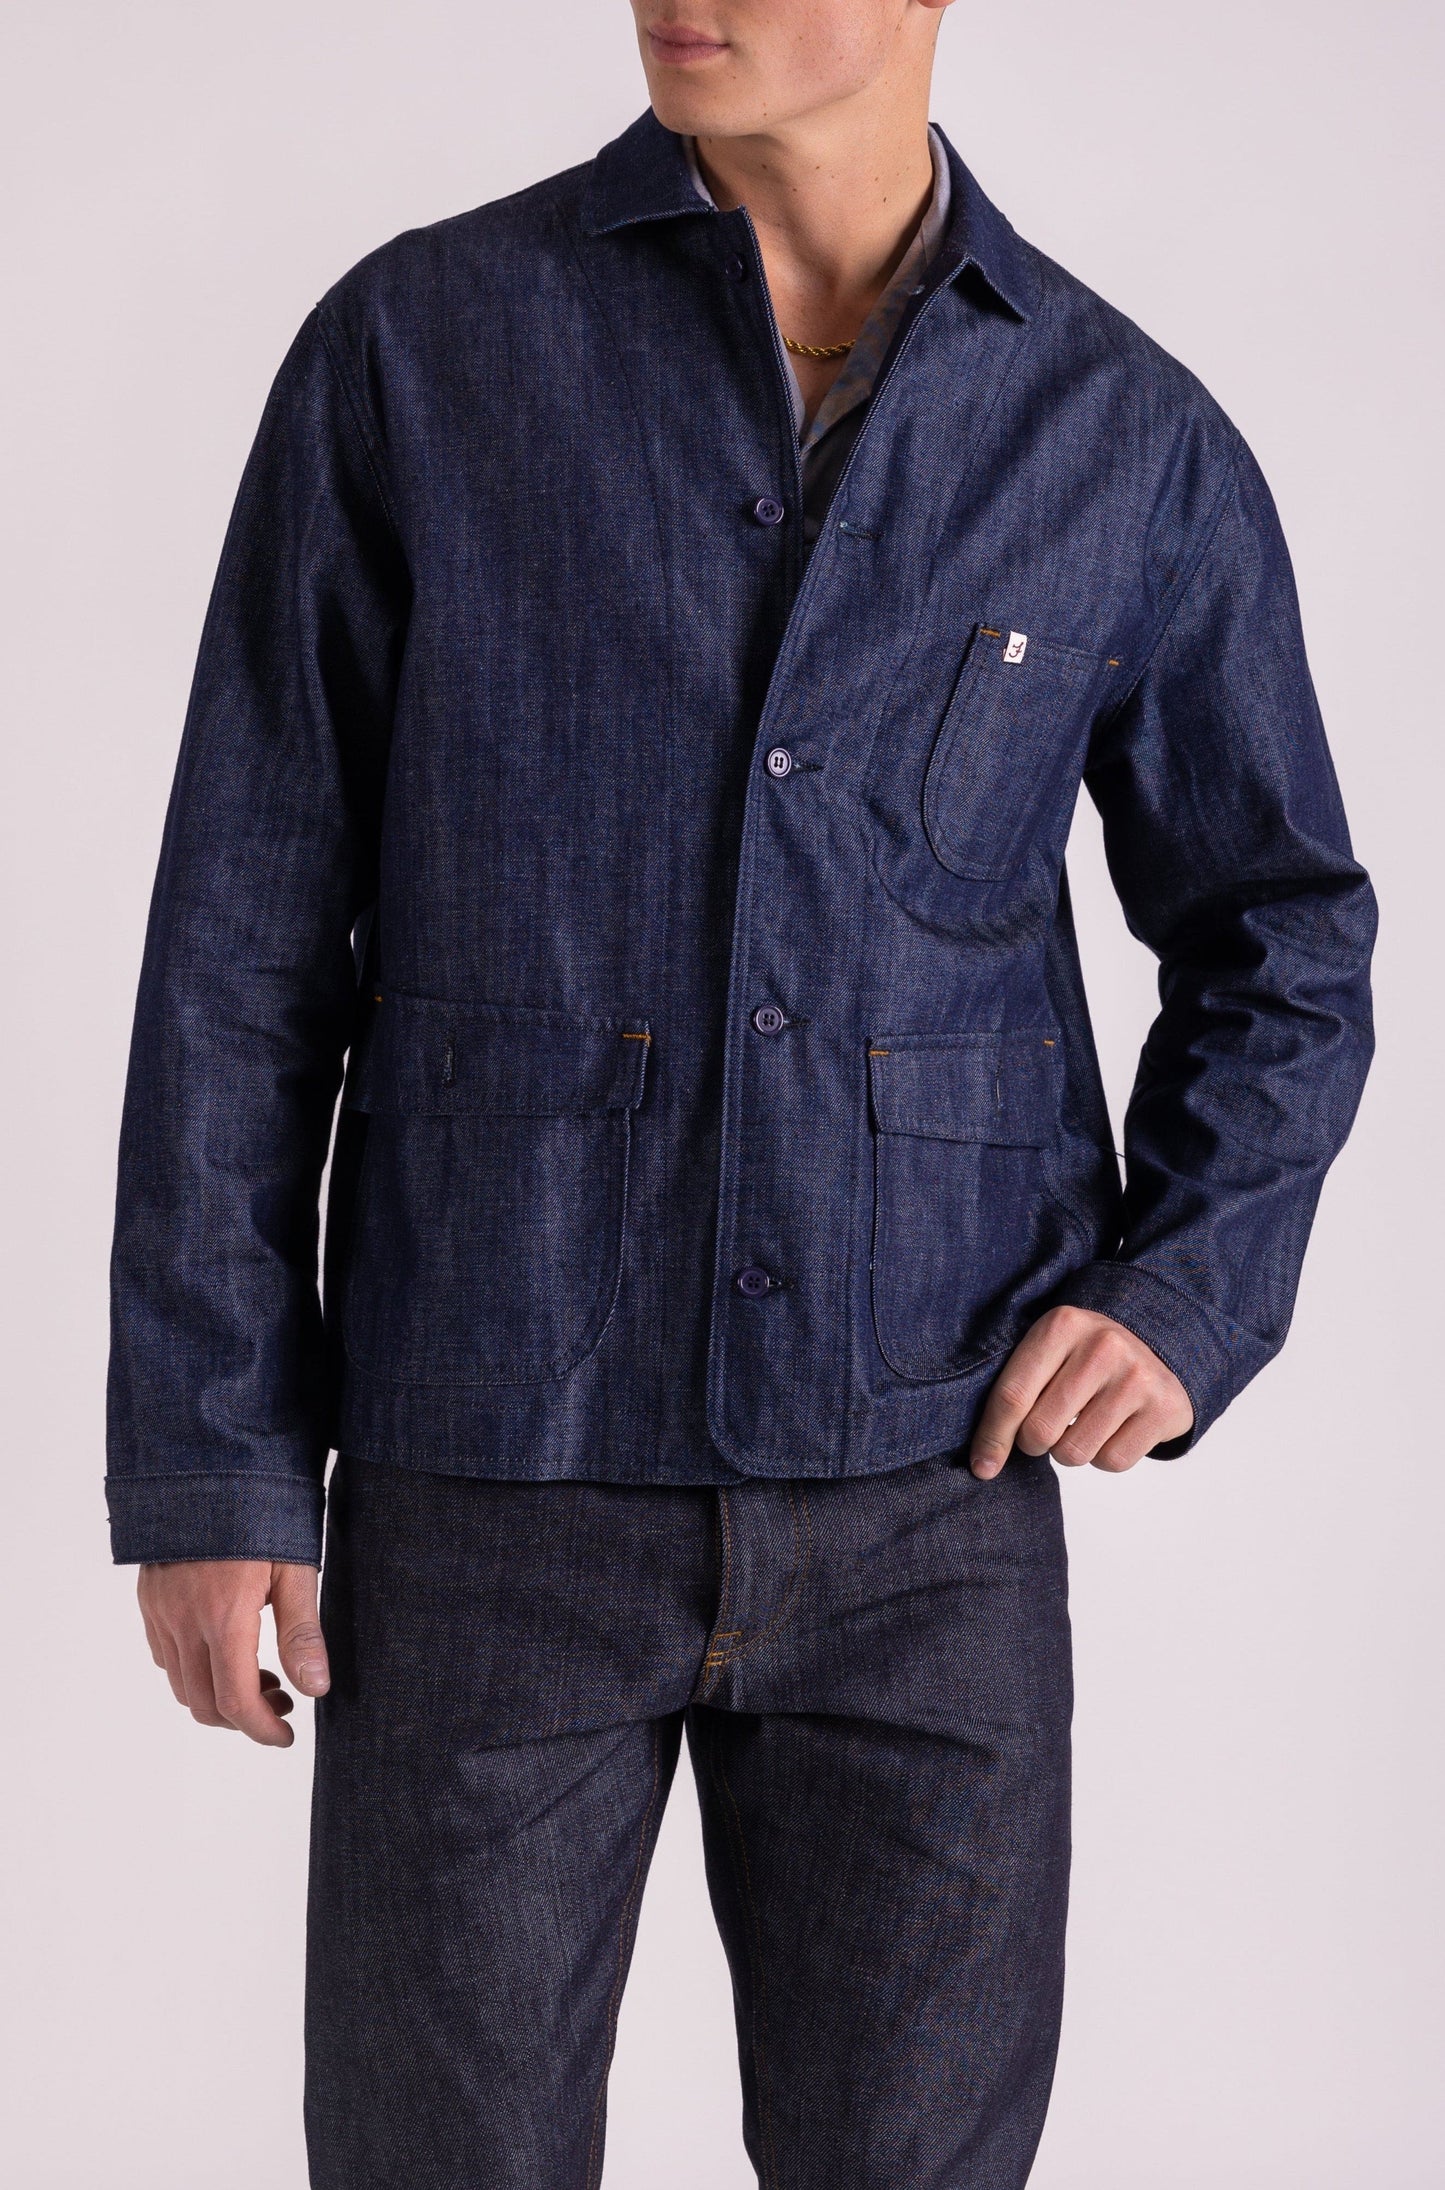 Crafter Chore Jacket Available Now – FABEE DENIM